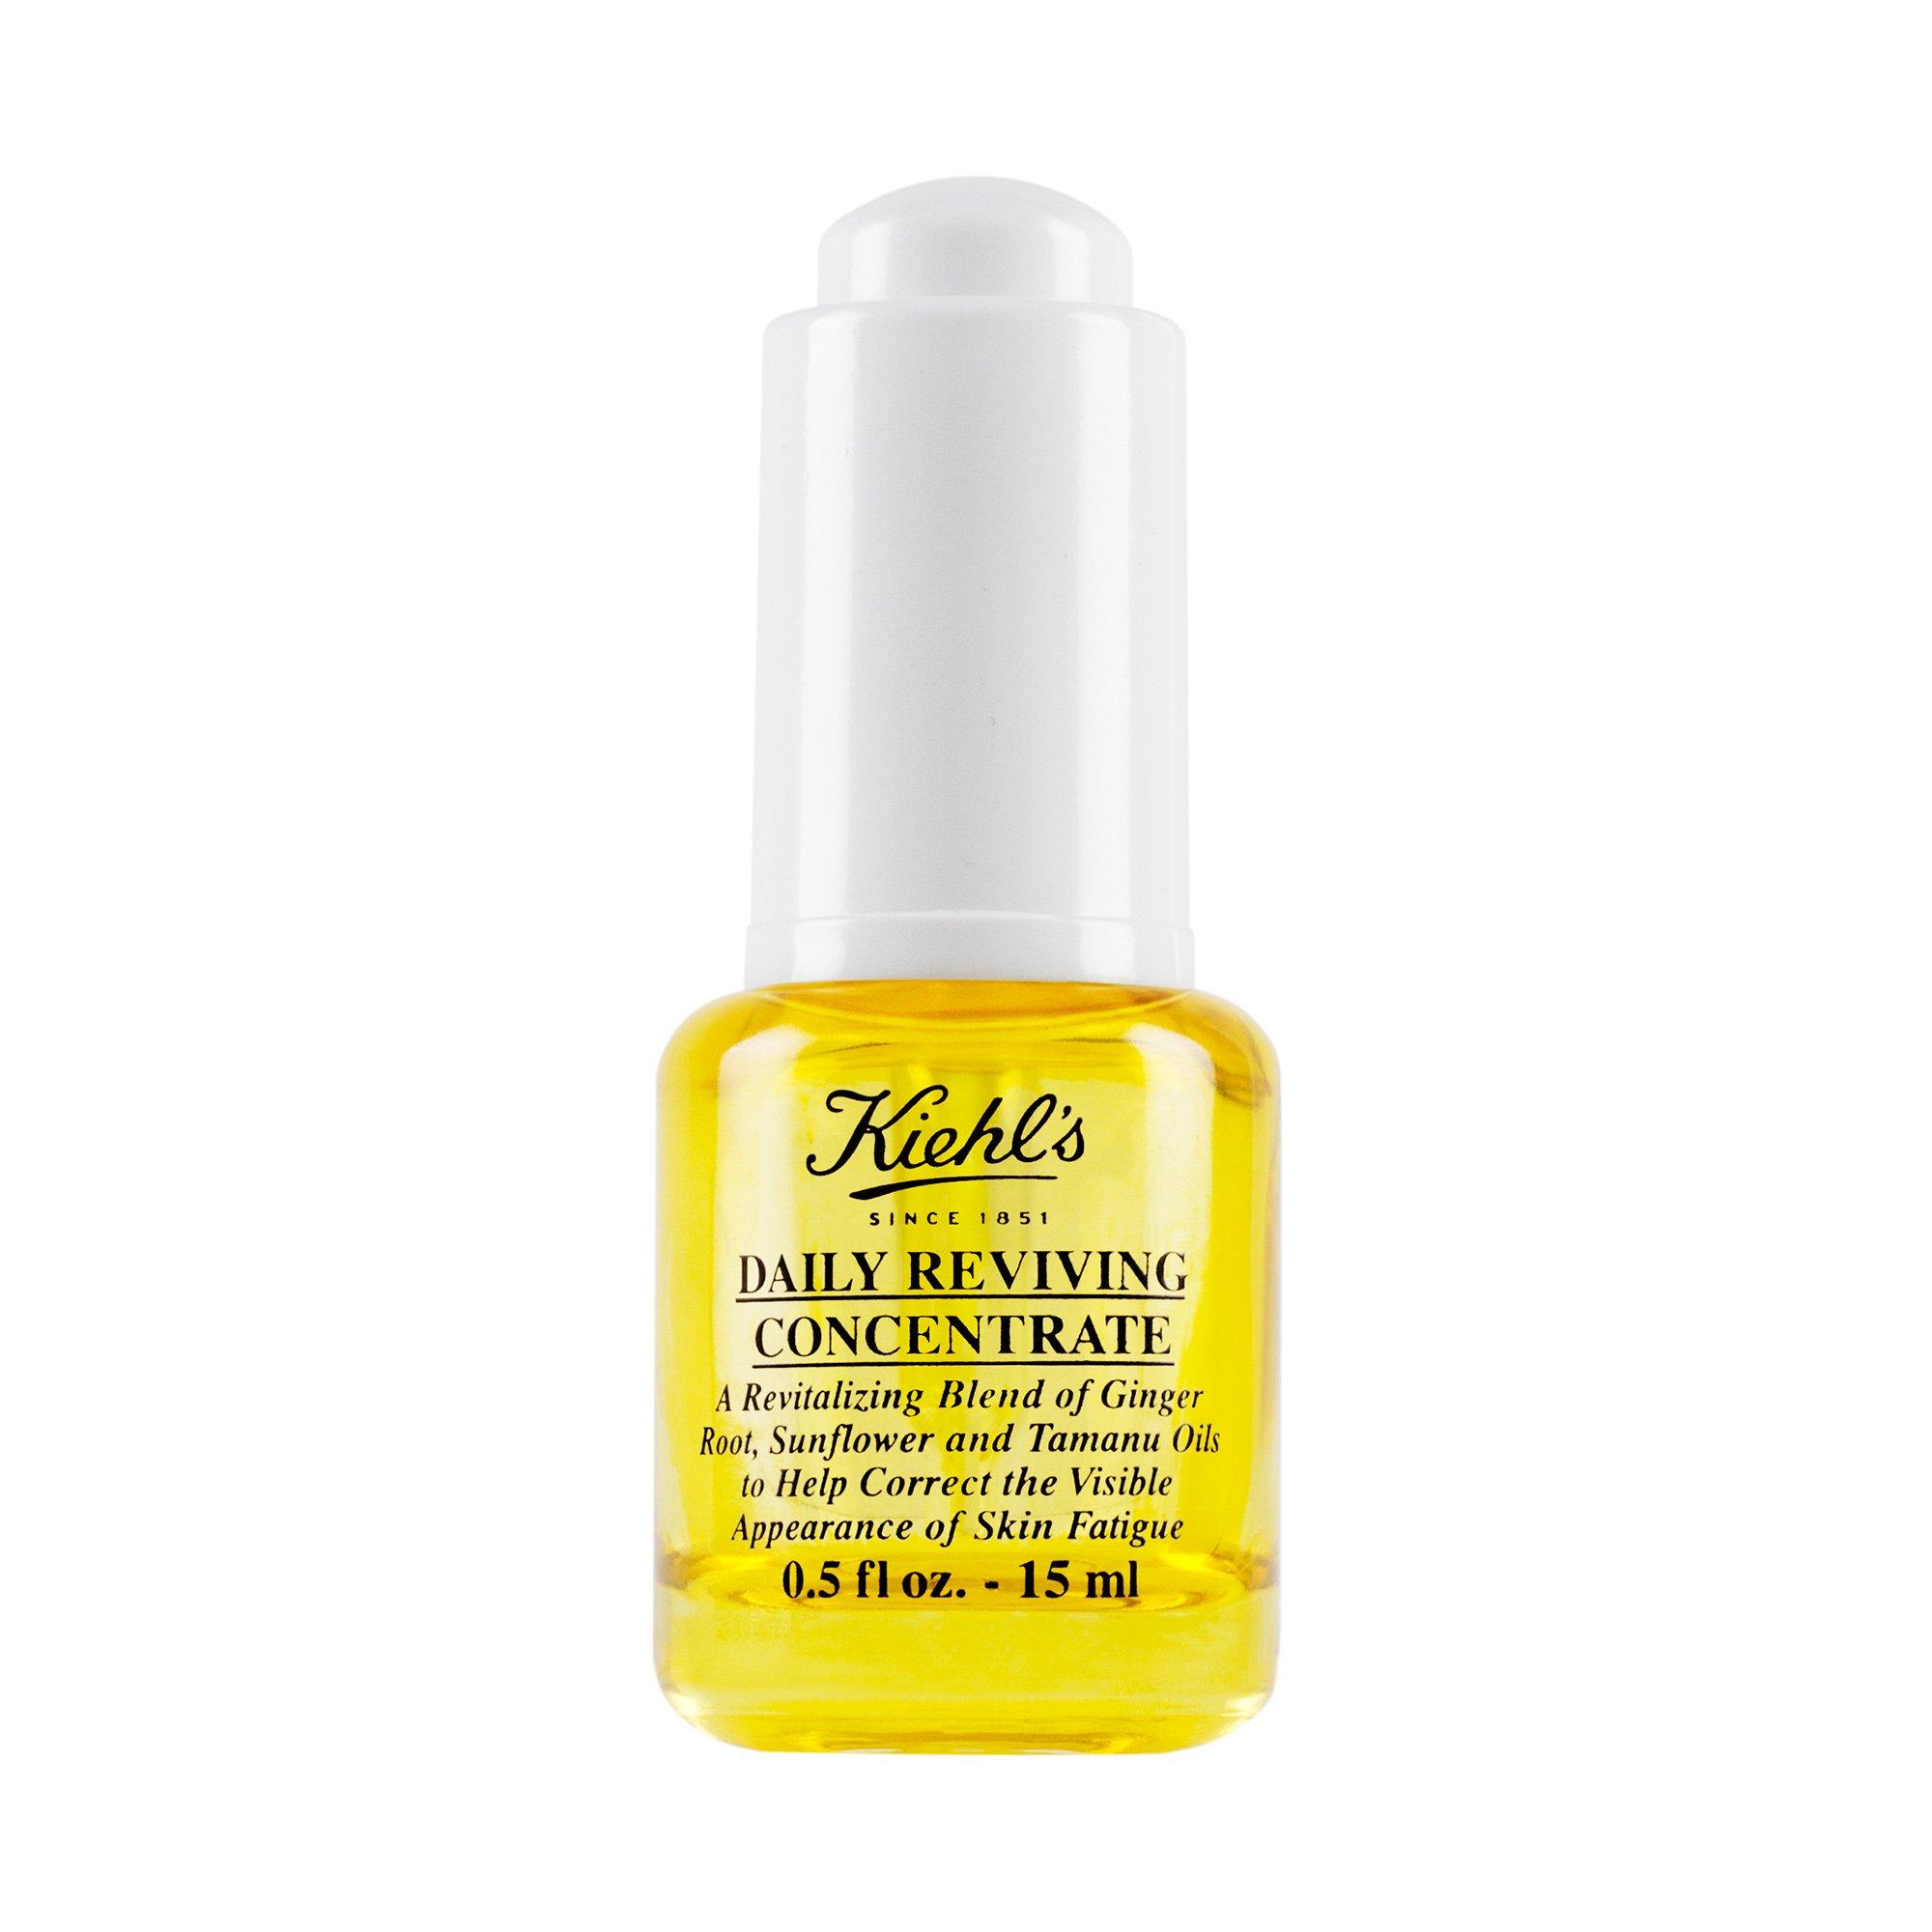 Image of Kiehl's Daily Daily Reviving Concentrate - 15ml